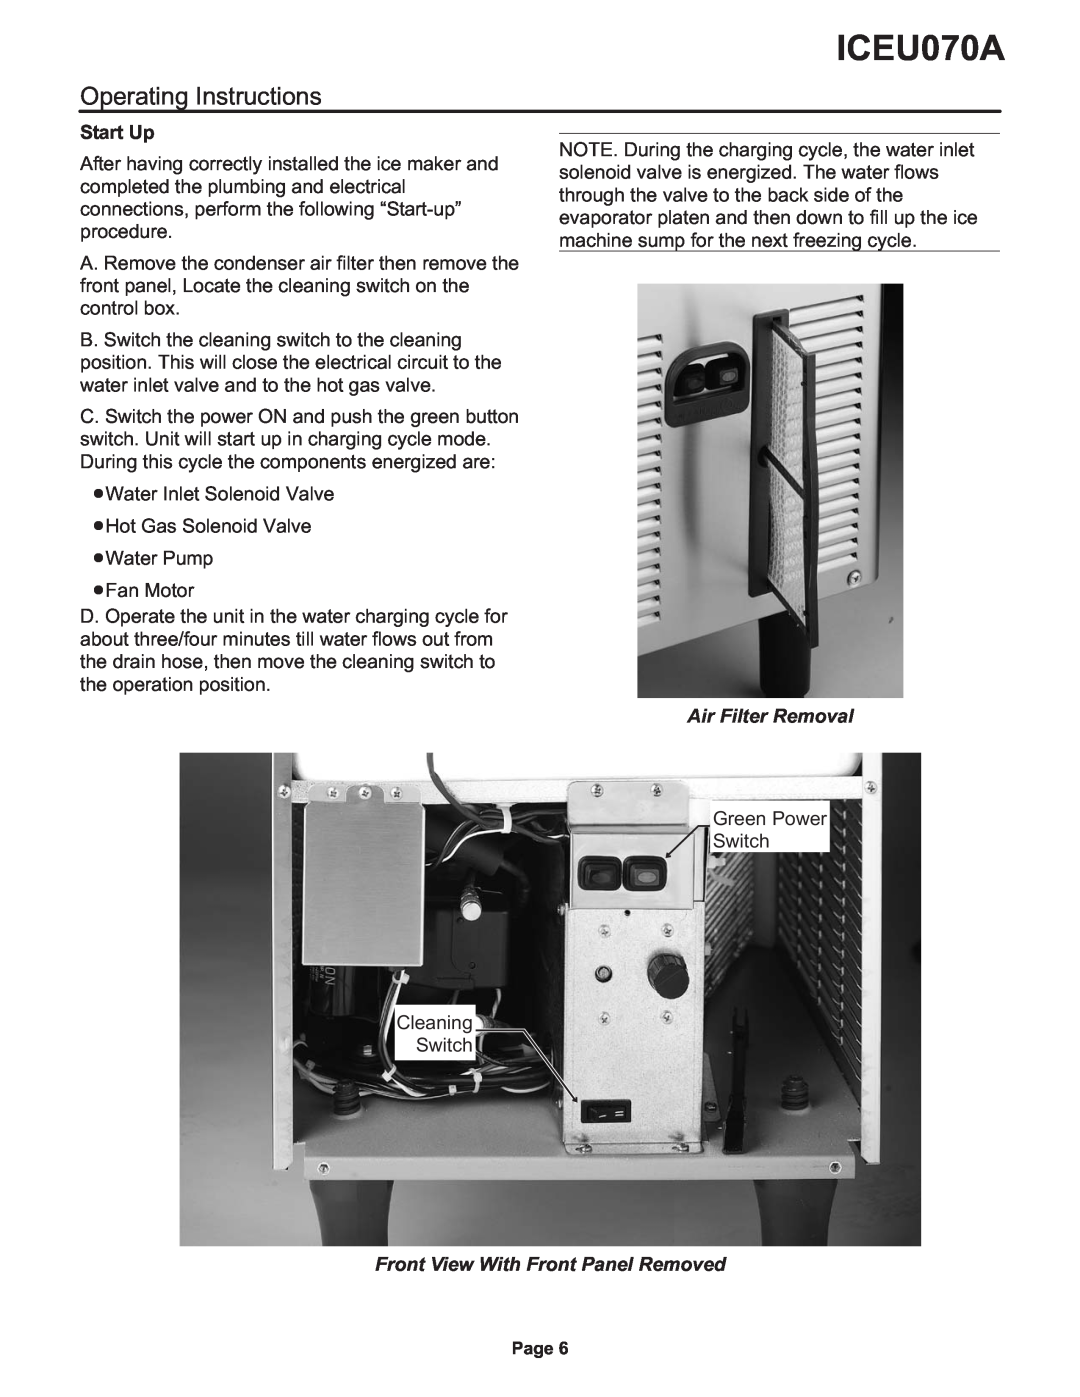 Ice-O-Matic ICEU070A Operating Instructions, Start Up, Air Filter Removal, Front View With Front Panel Removed 